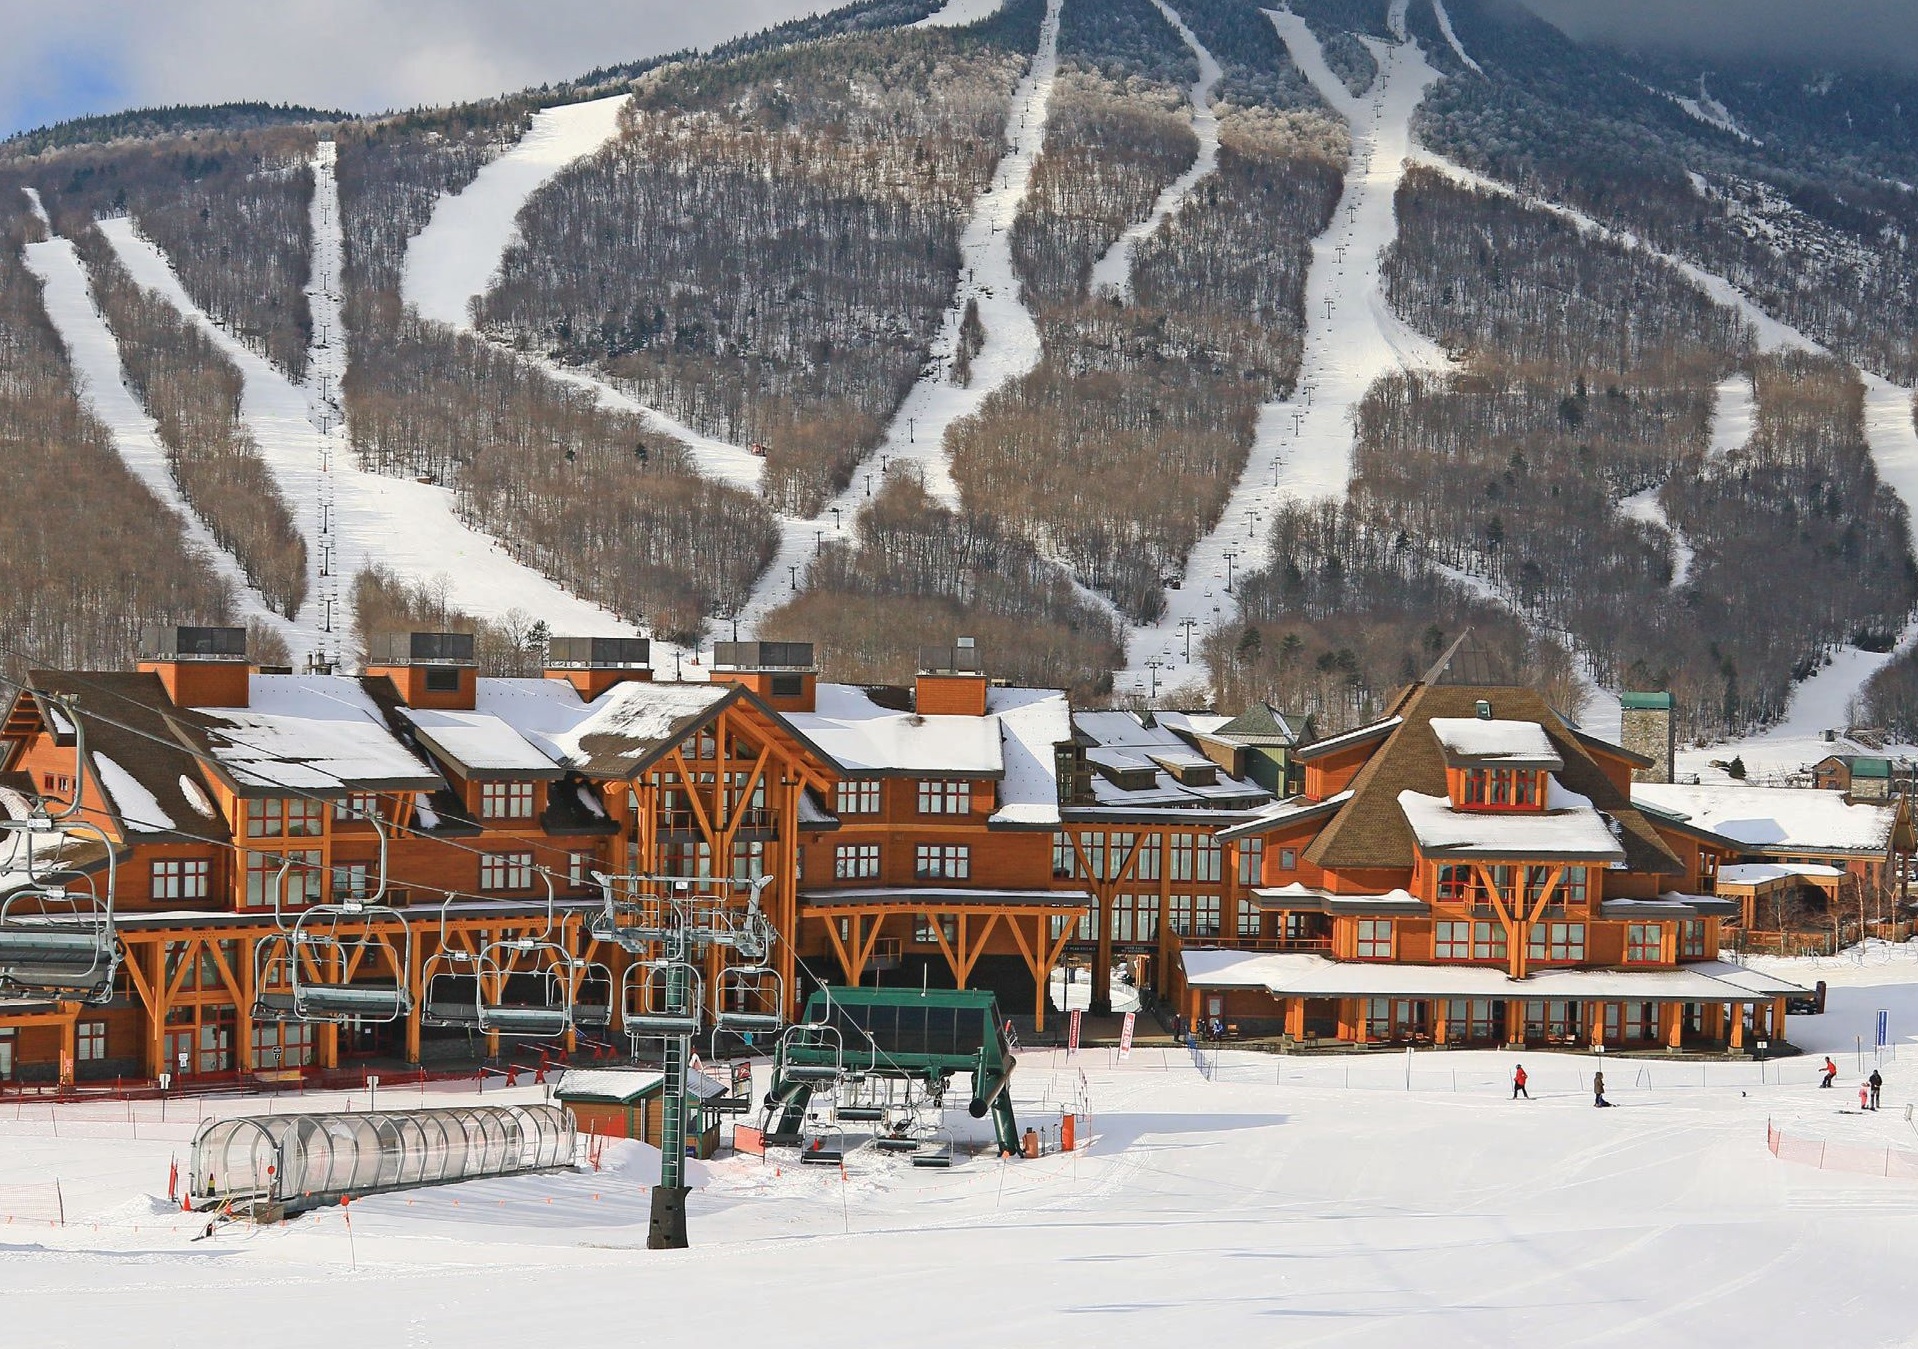 Incredible landscapes and plenty of slopeside amenities make winter the perfect time to experience Stowe.  PHOTO COURTESY OF STOWE MOUNTAIN RESORT